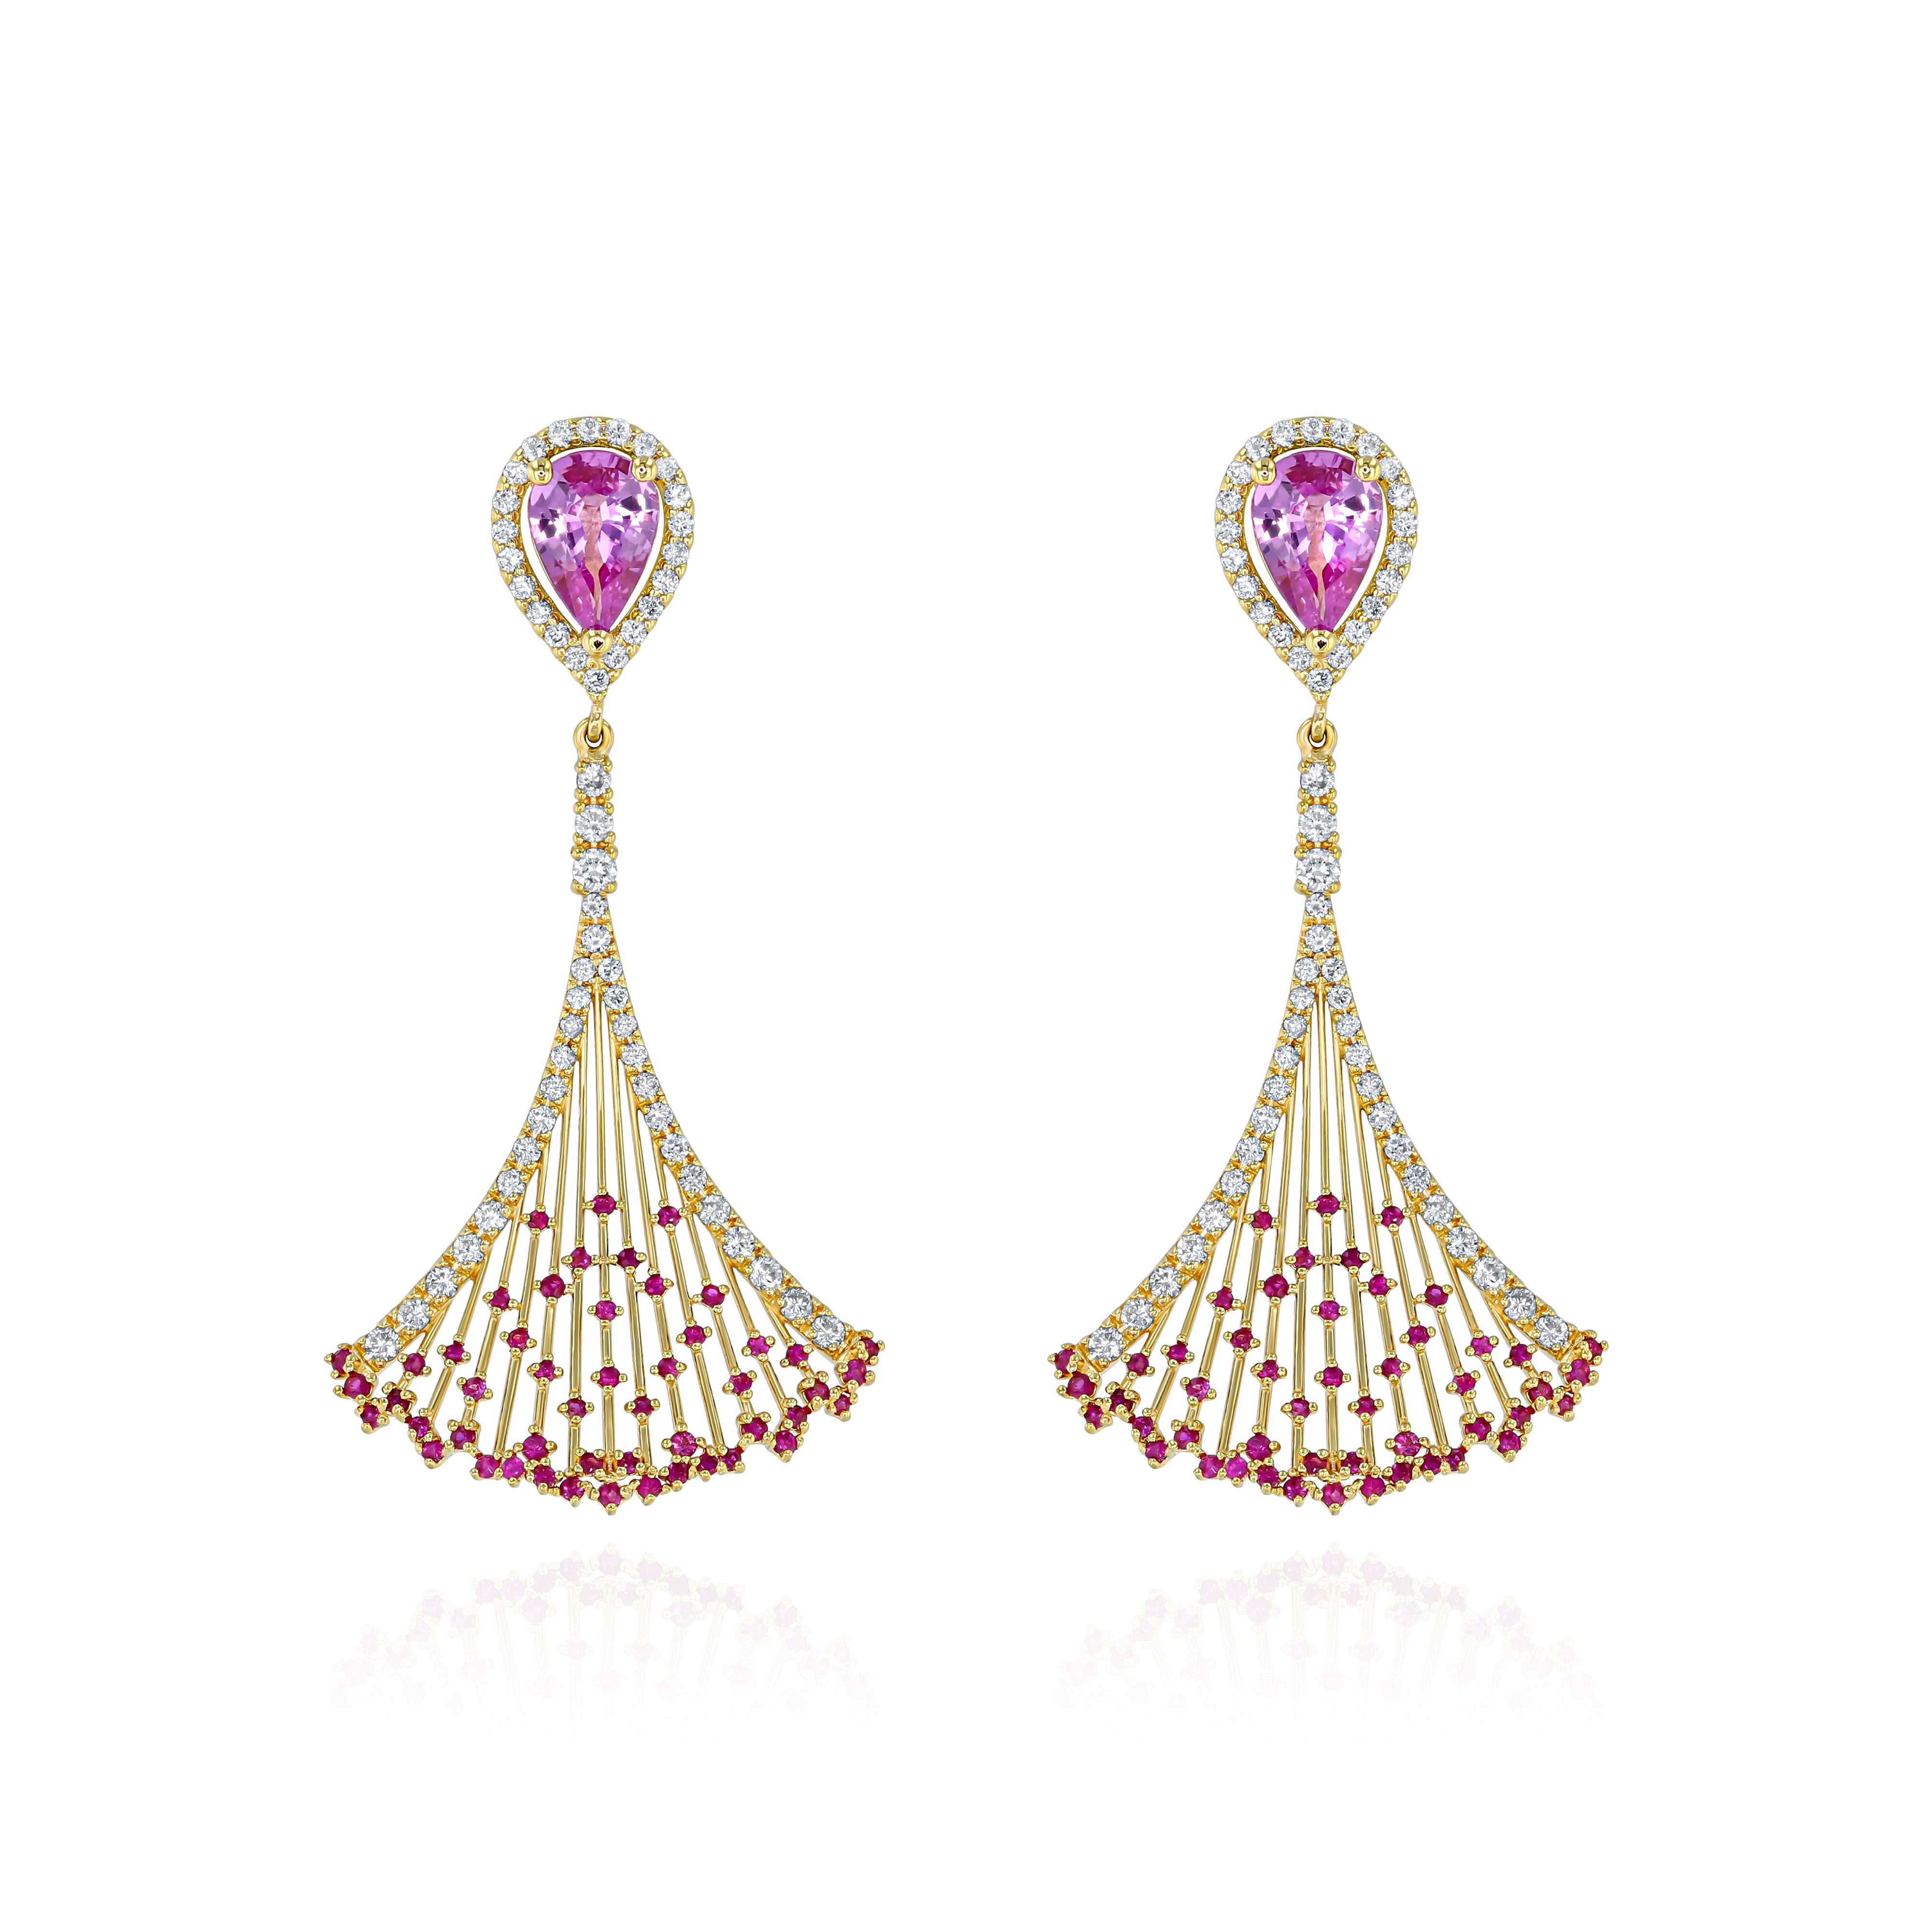 Yellow Gold triangular Earrings with a pear shaped Pink Sapphire and small round Rubies, Large